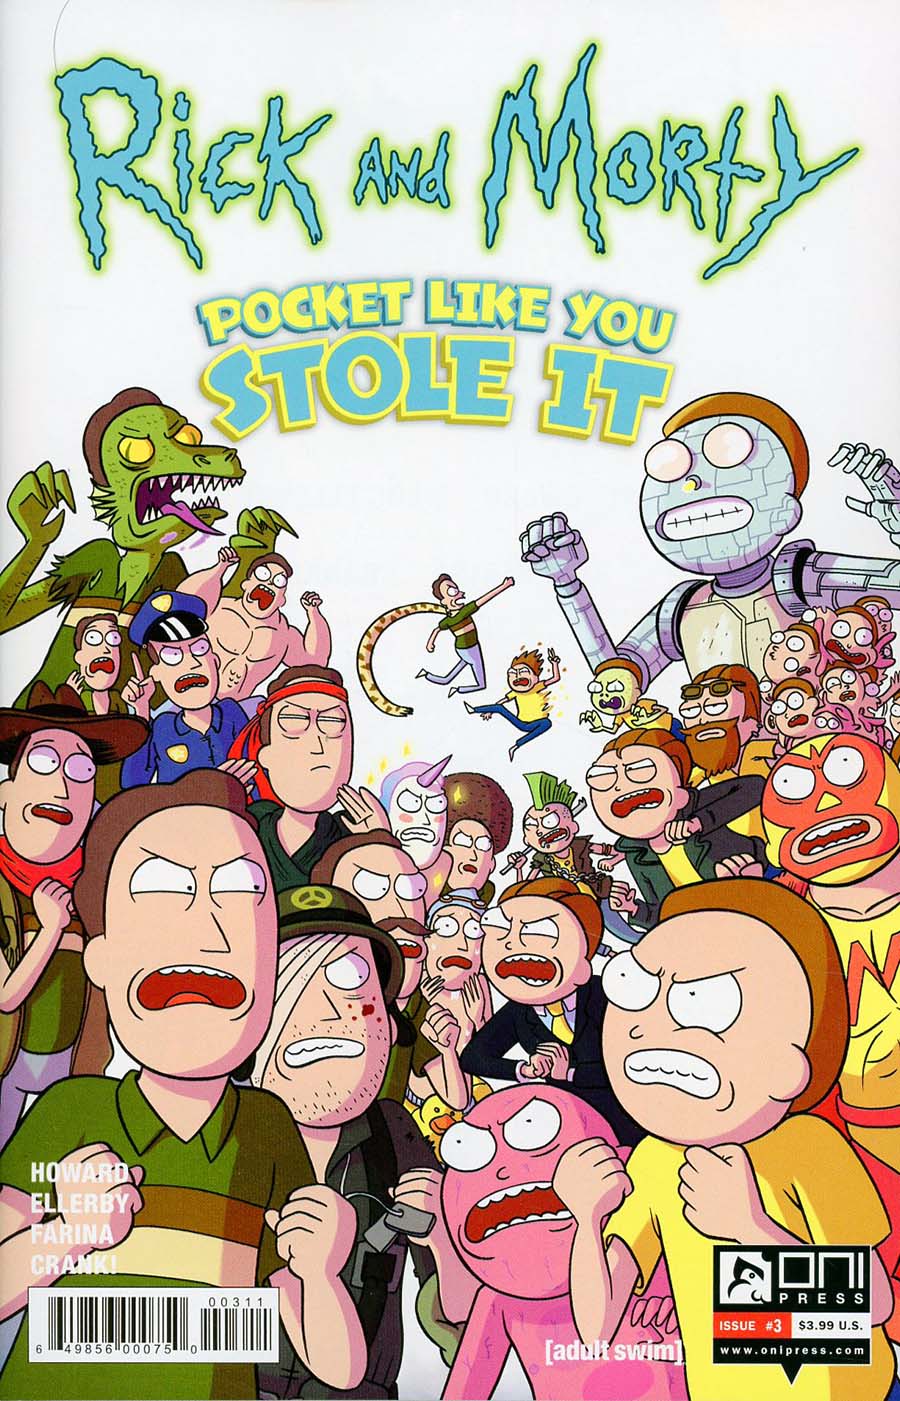 Rick And Morty Pocket Like You Stole It #3 Cover A Regular Katy Farina Cover